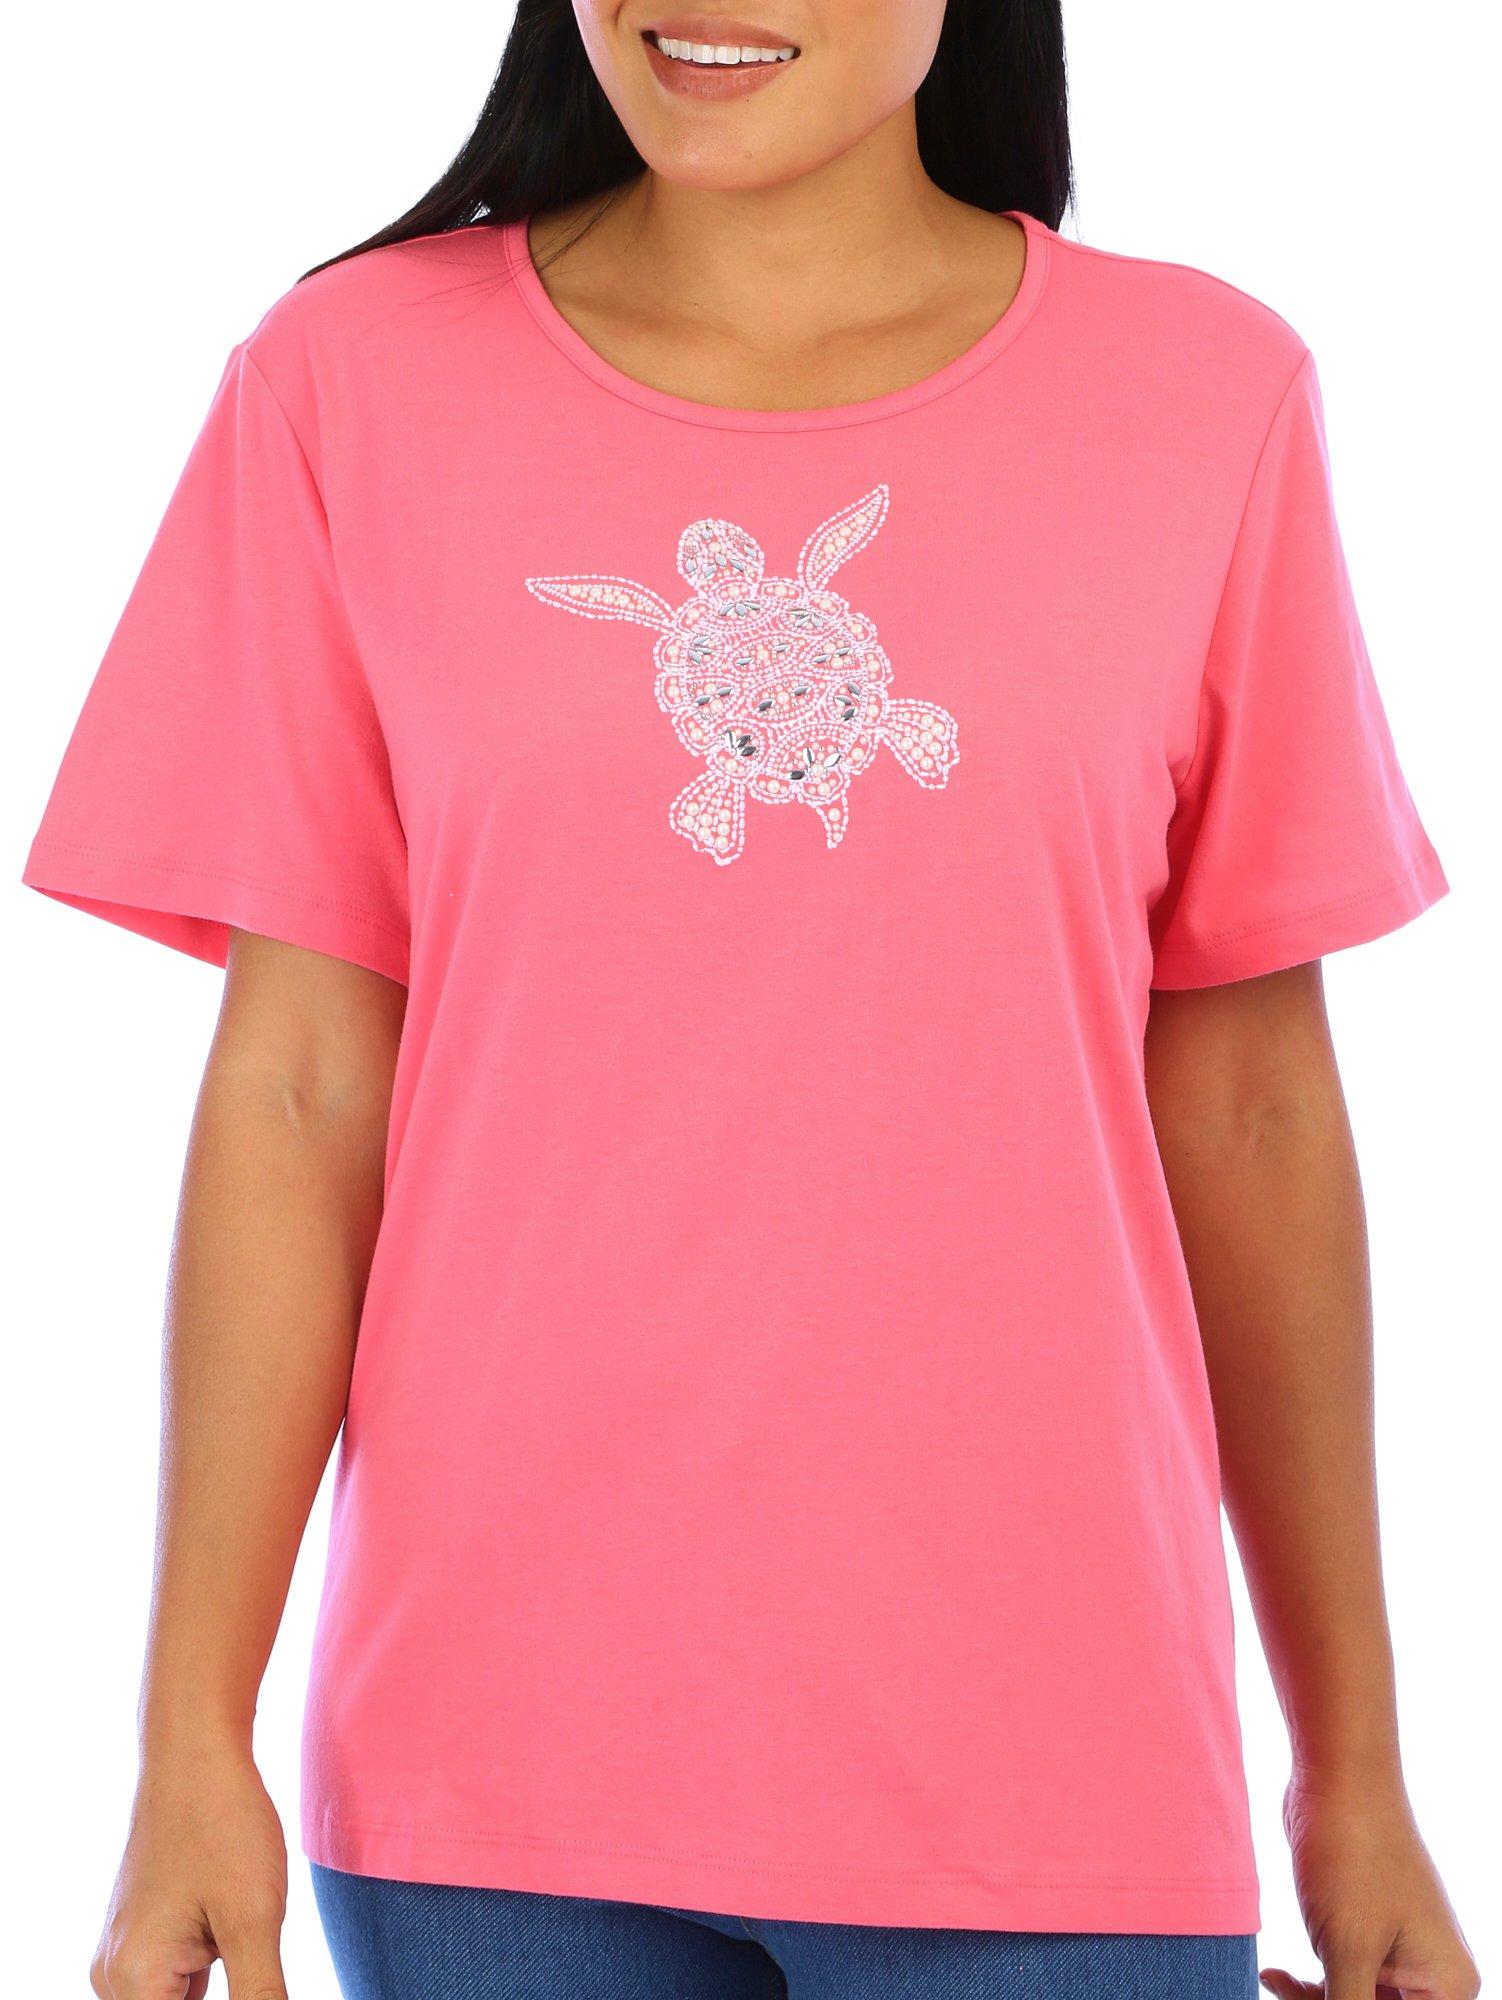 Womens Solid Embroidered Sea Turtle Tee